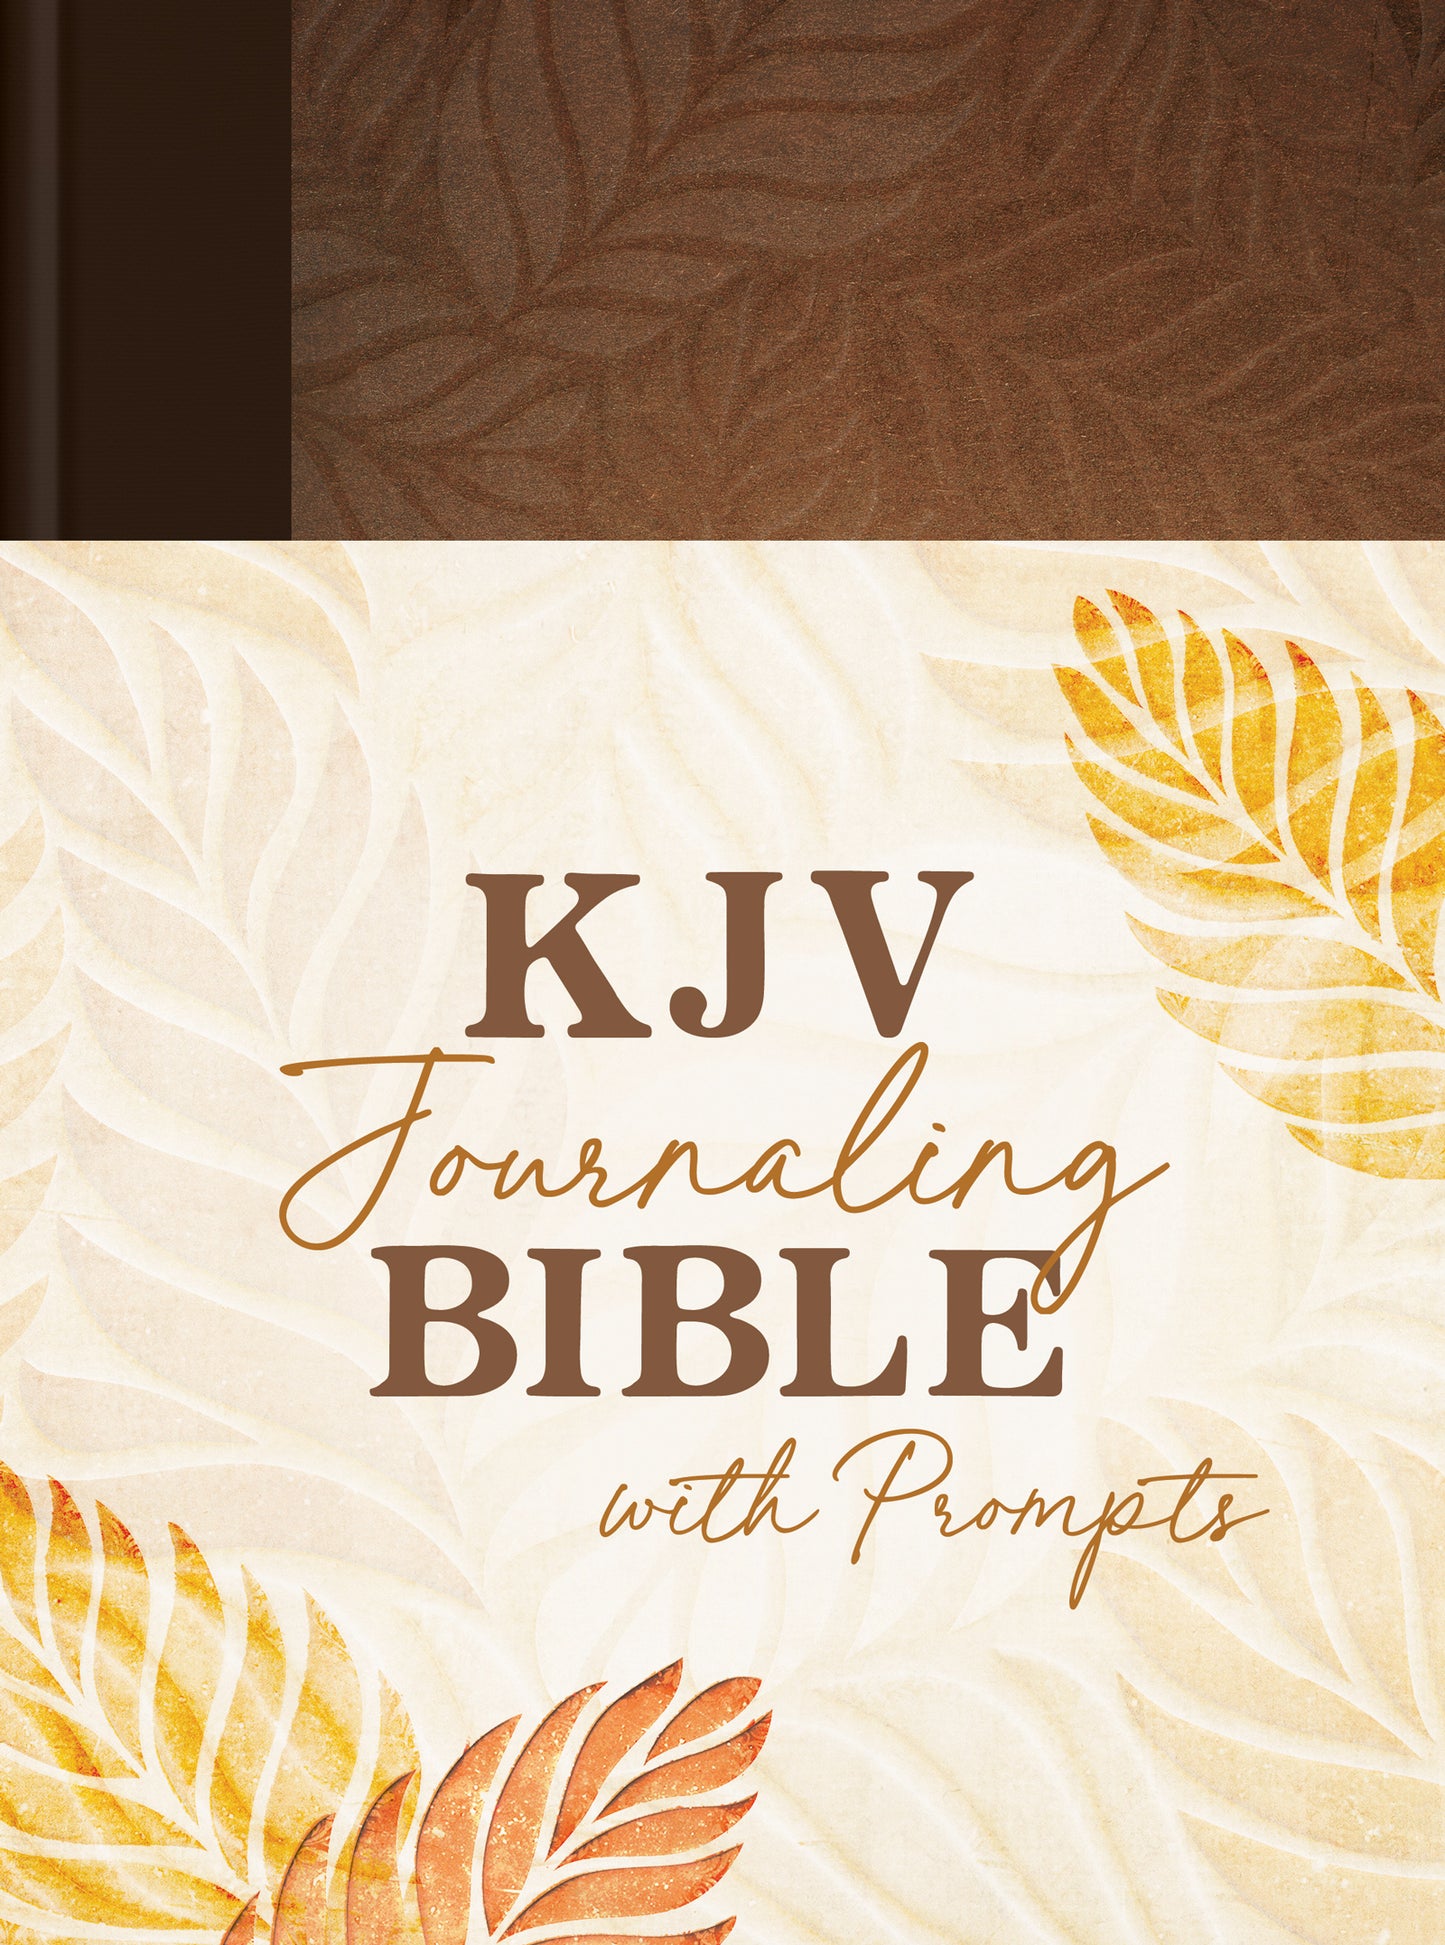 KJV Journaling Bible with Prompts [Copper Leaf] - The Christian Gift Company